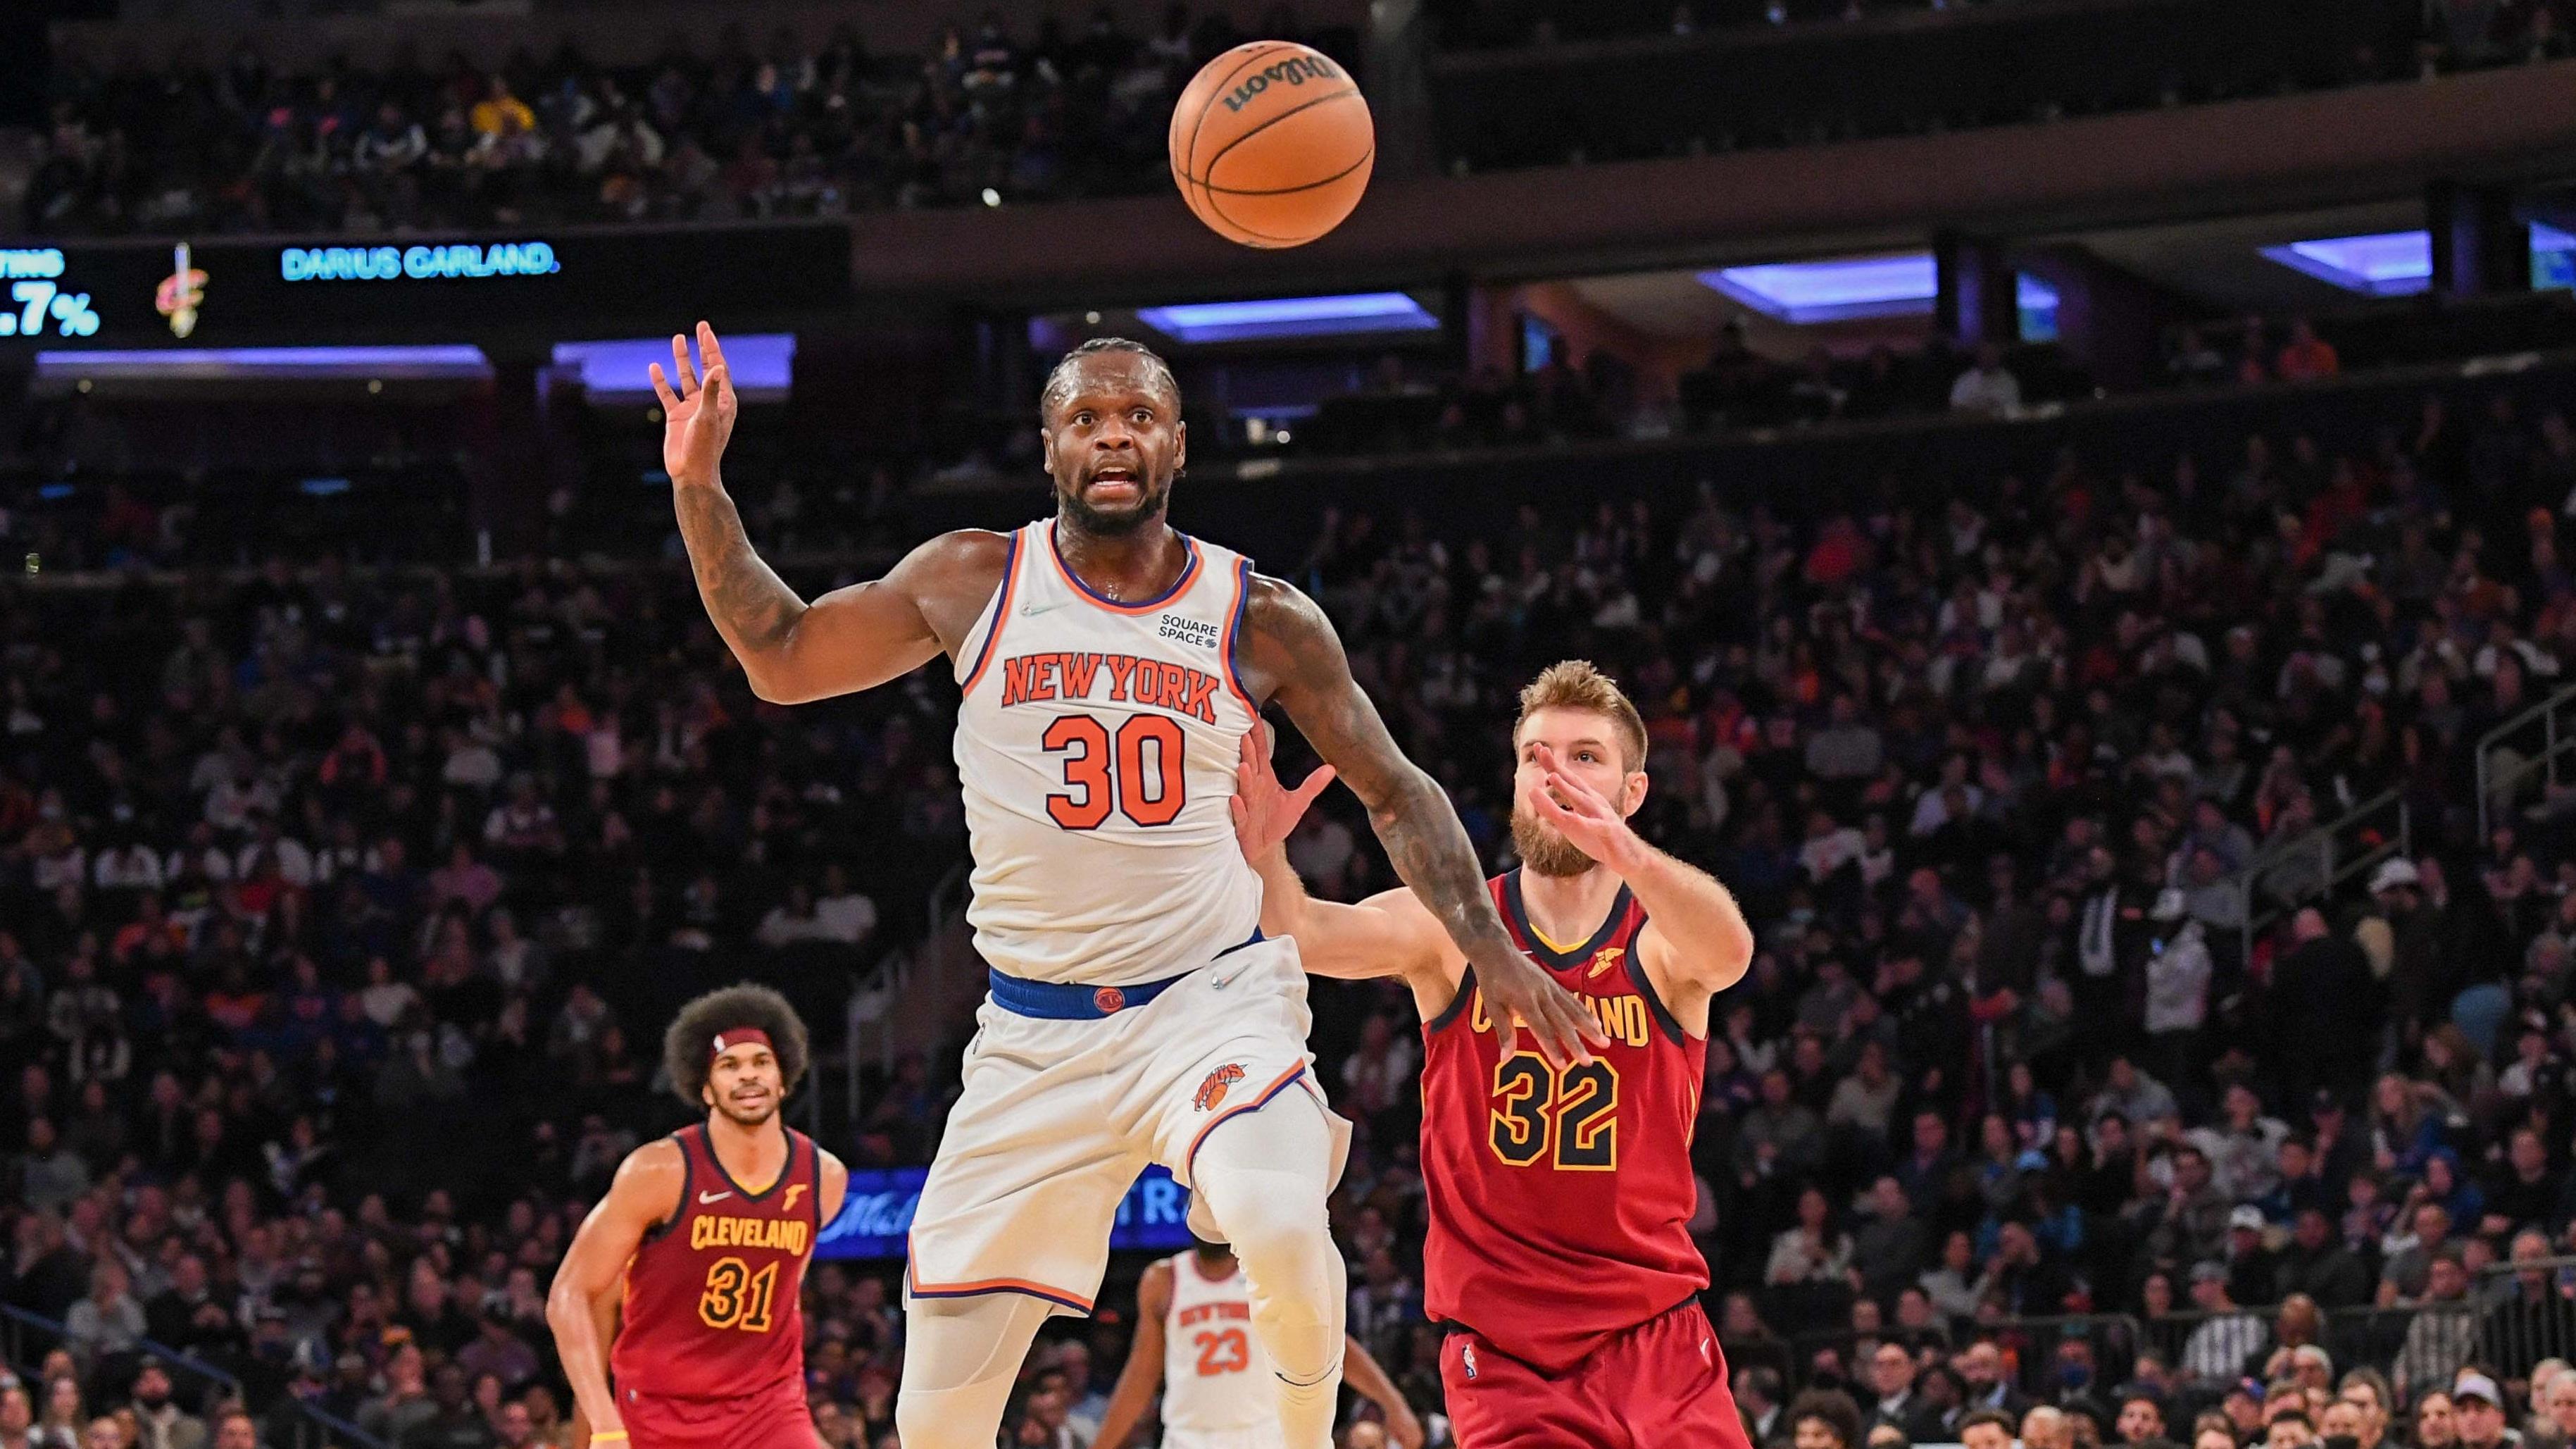 Nov 7, 2021; New York, New York, USA; New York Knicks forward Julius Randle (30) and Cleveland Cavaliers forward Dean Wade (32) go after a loose ball during the second quarter at Madison Square Garden. Mandatory Credit: Dennis Schneidler-USA TODAY Sports / © Dennis Schneidler-USA TODAY Sports